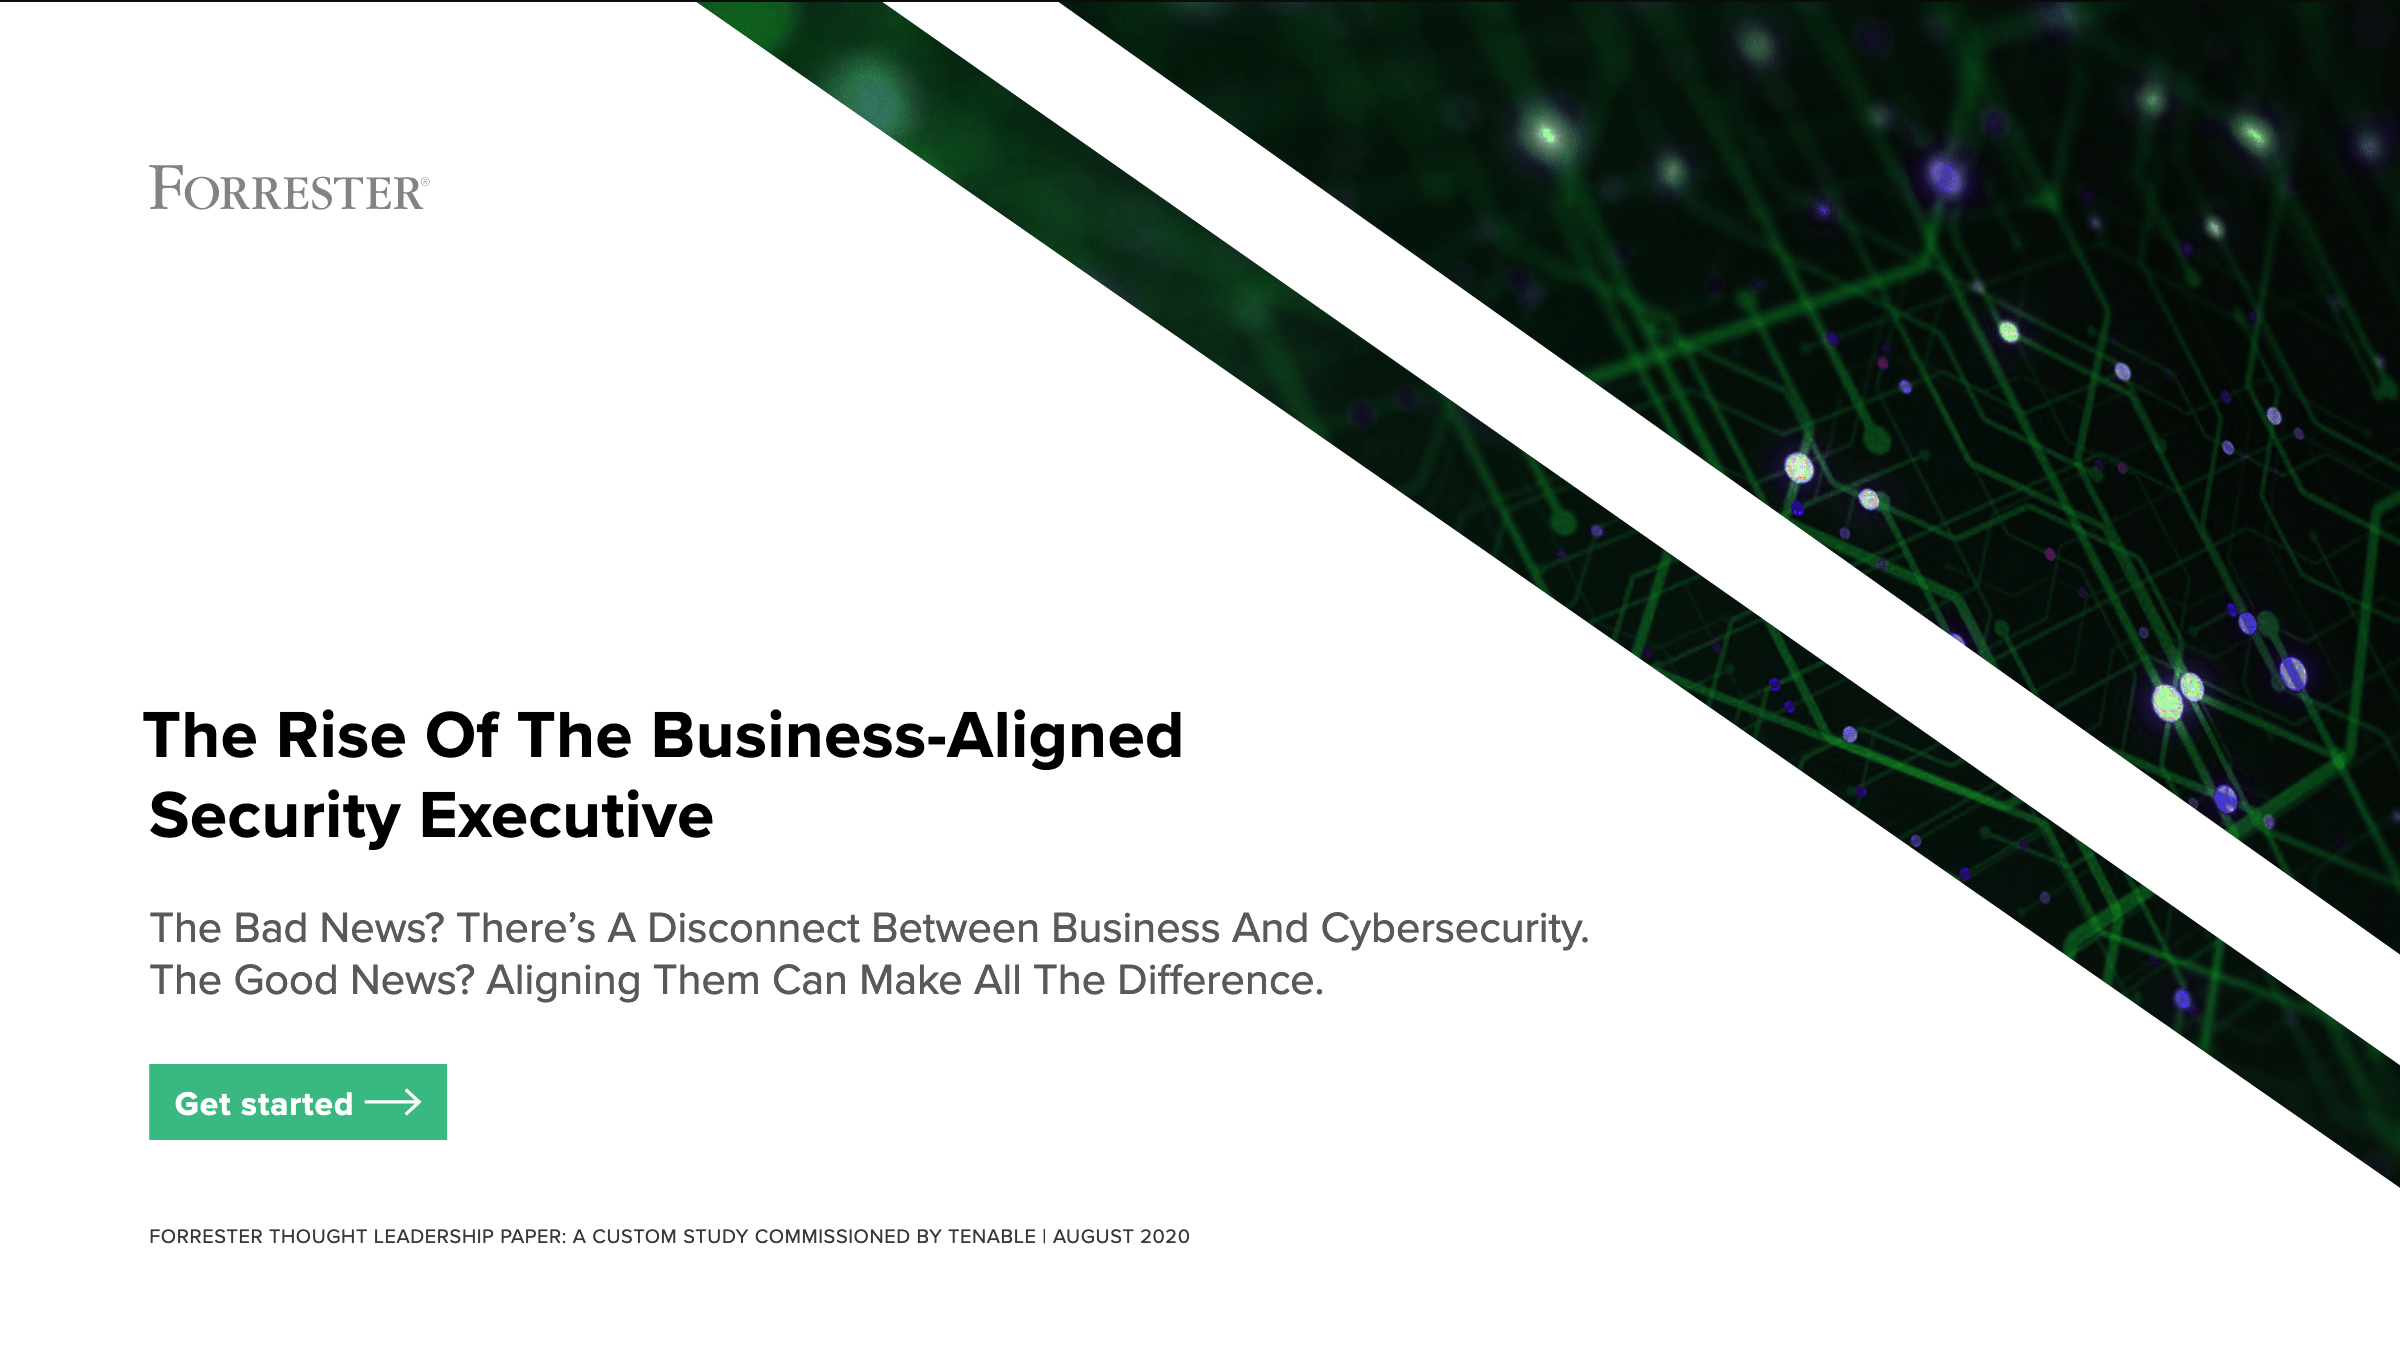 Screenshot 2020 11 24 Forrester The Rise Of The Business Aligned Security Executive pdf - Forrester TLP